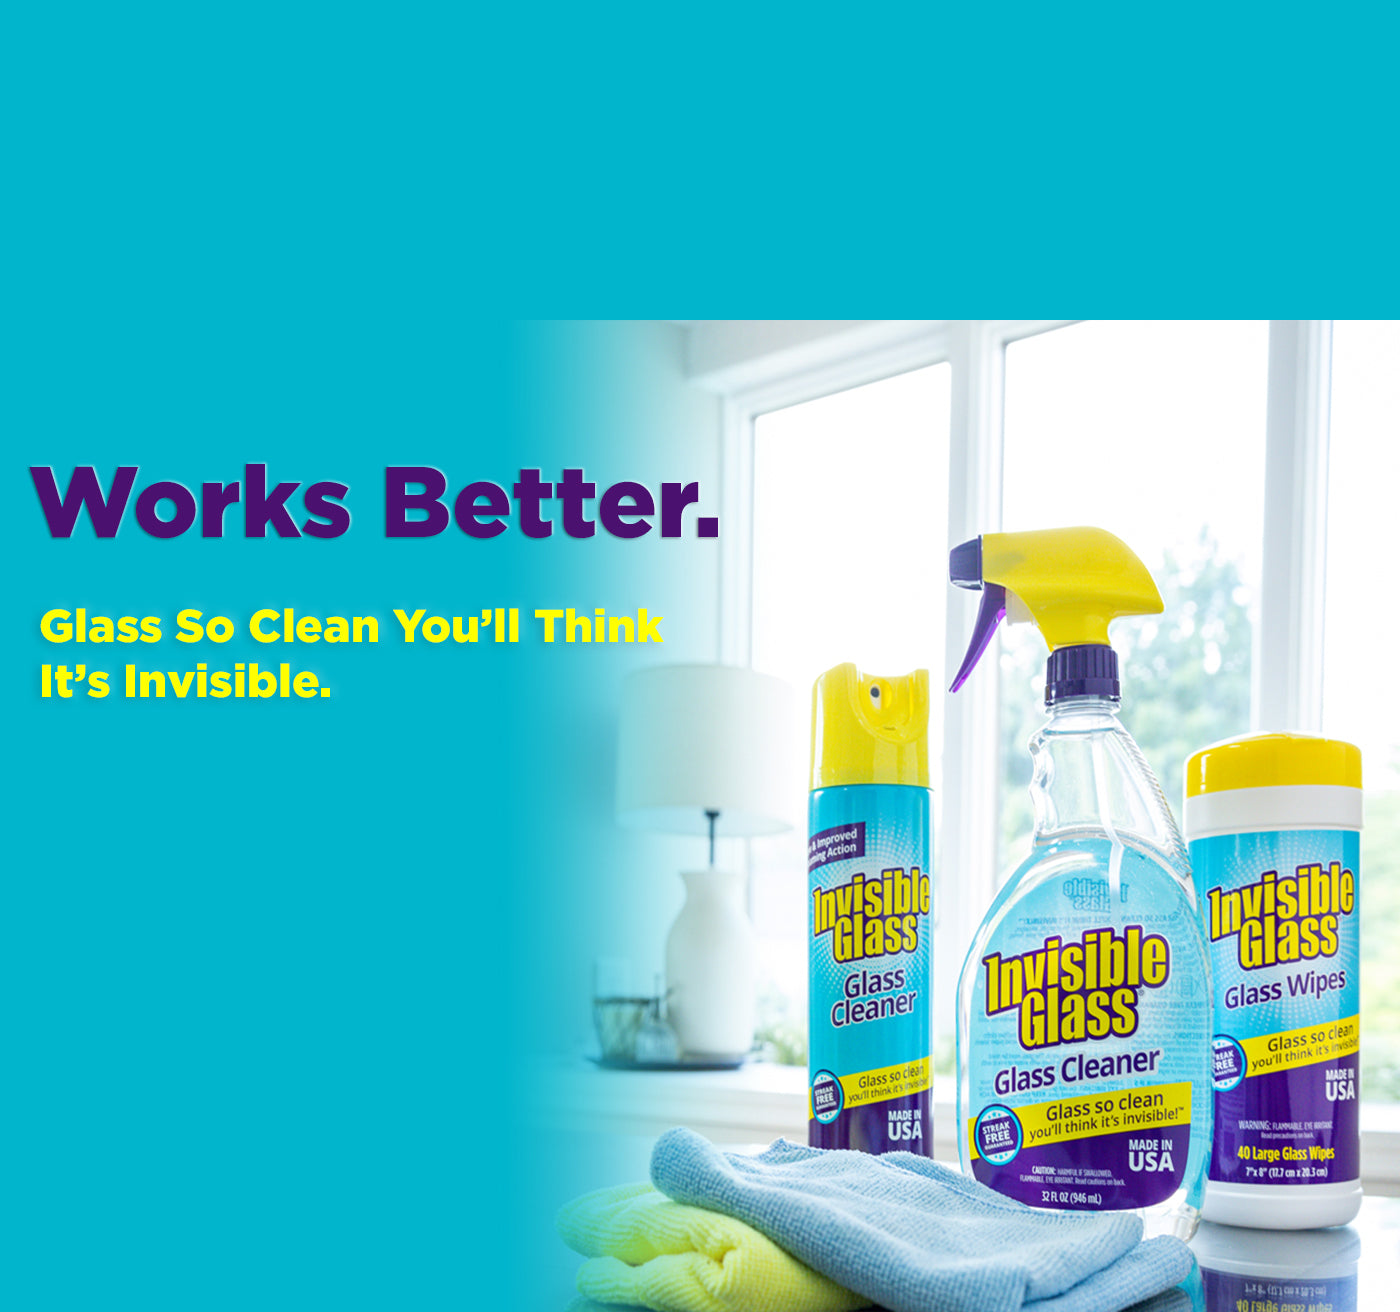 Invisible Glass - Residue Free Glass Cleaner 